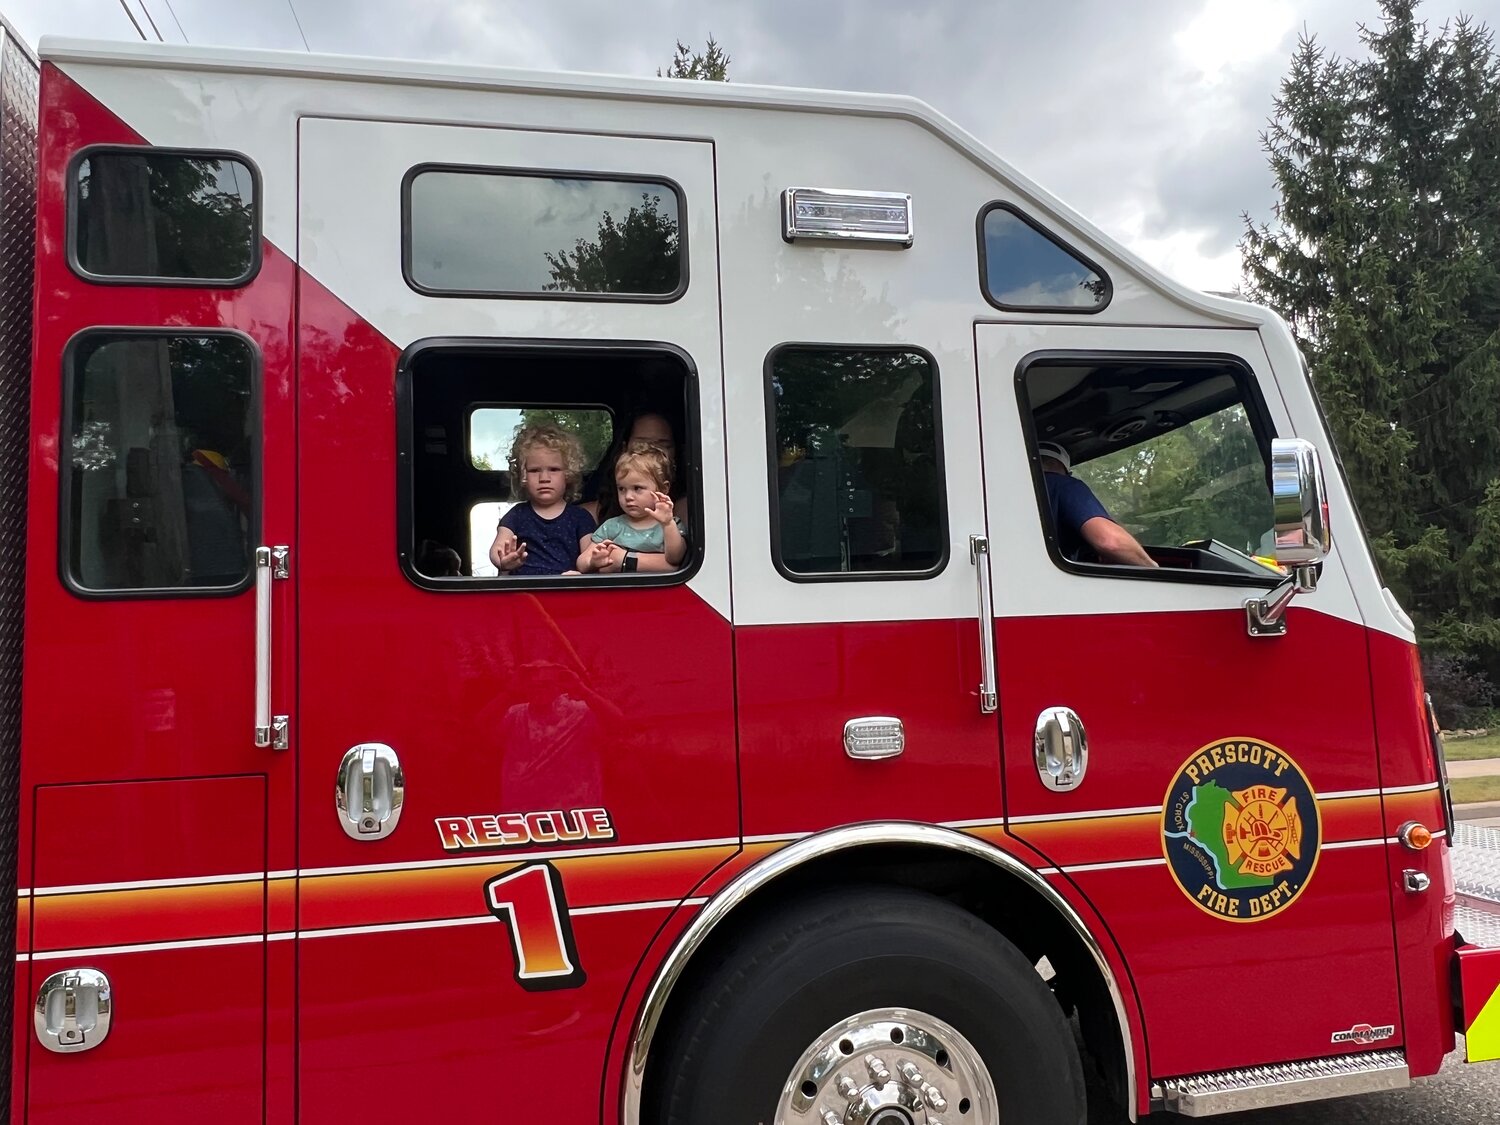 Kids waved from the Prescott Fire Department trucks that formed an impressive procession early in the Prescott Daze Parade Sunday afternoon.